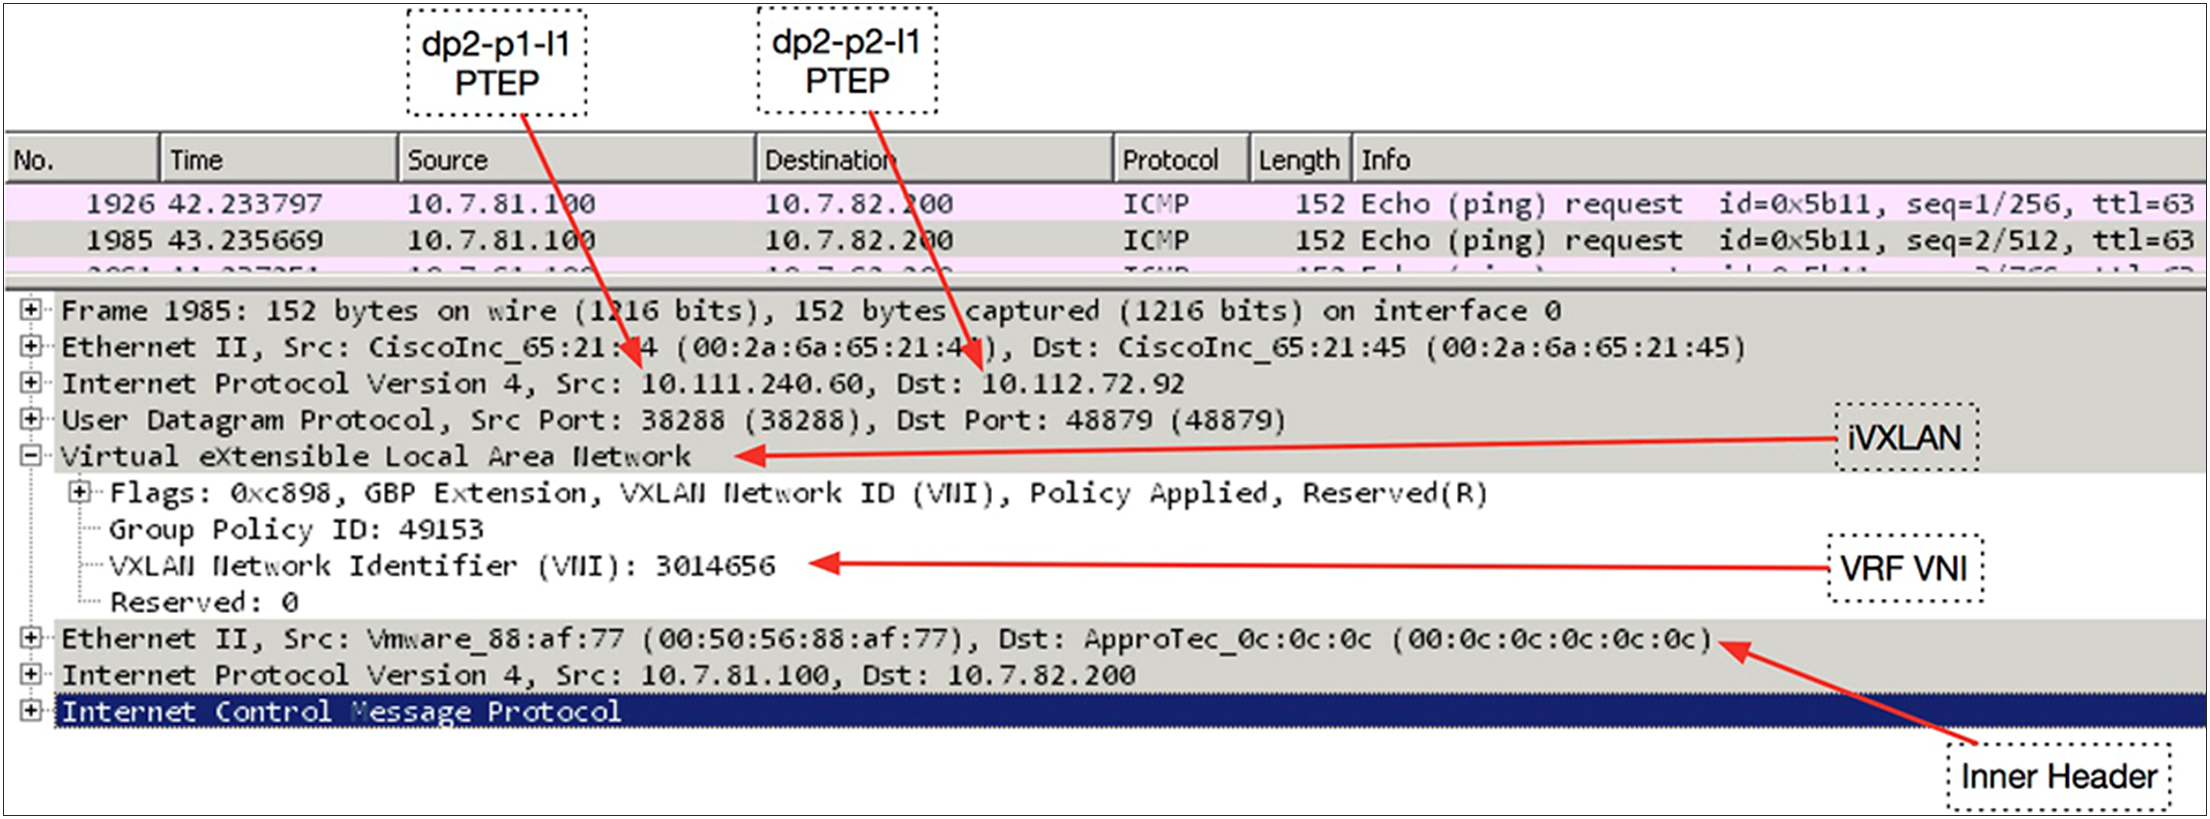 Decoding the packet capture between two IPN switches